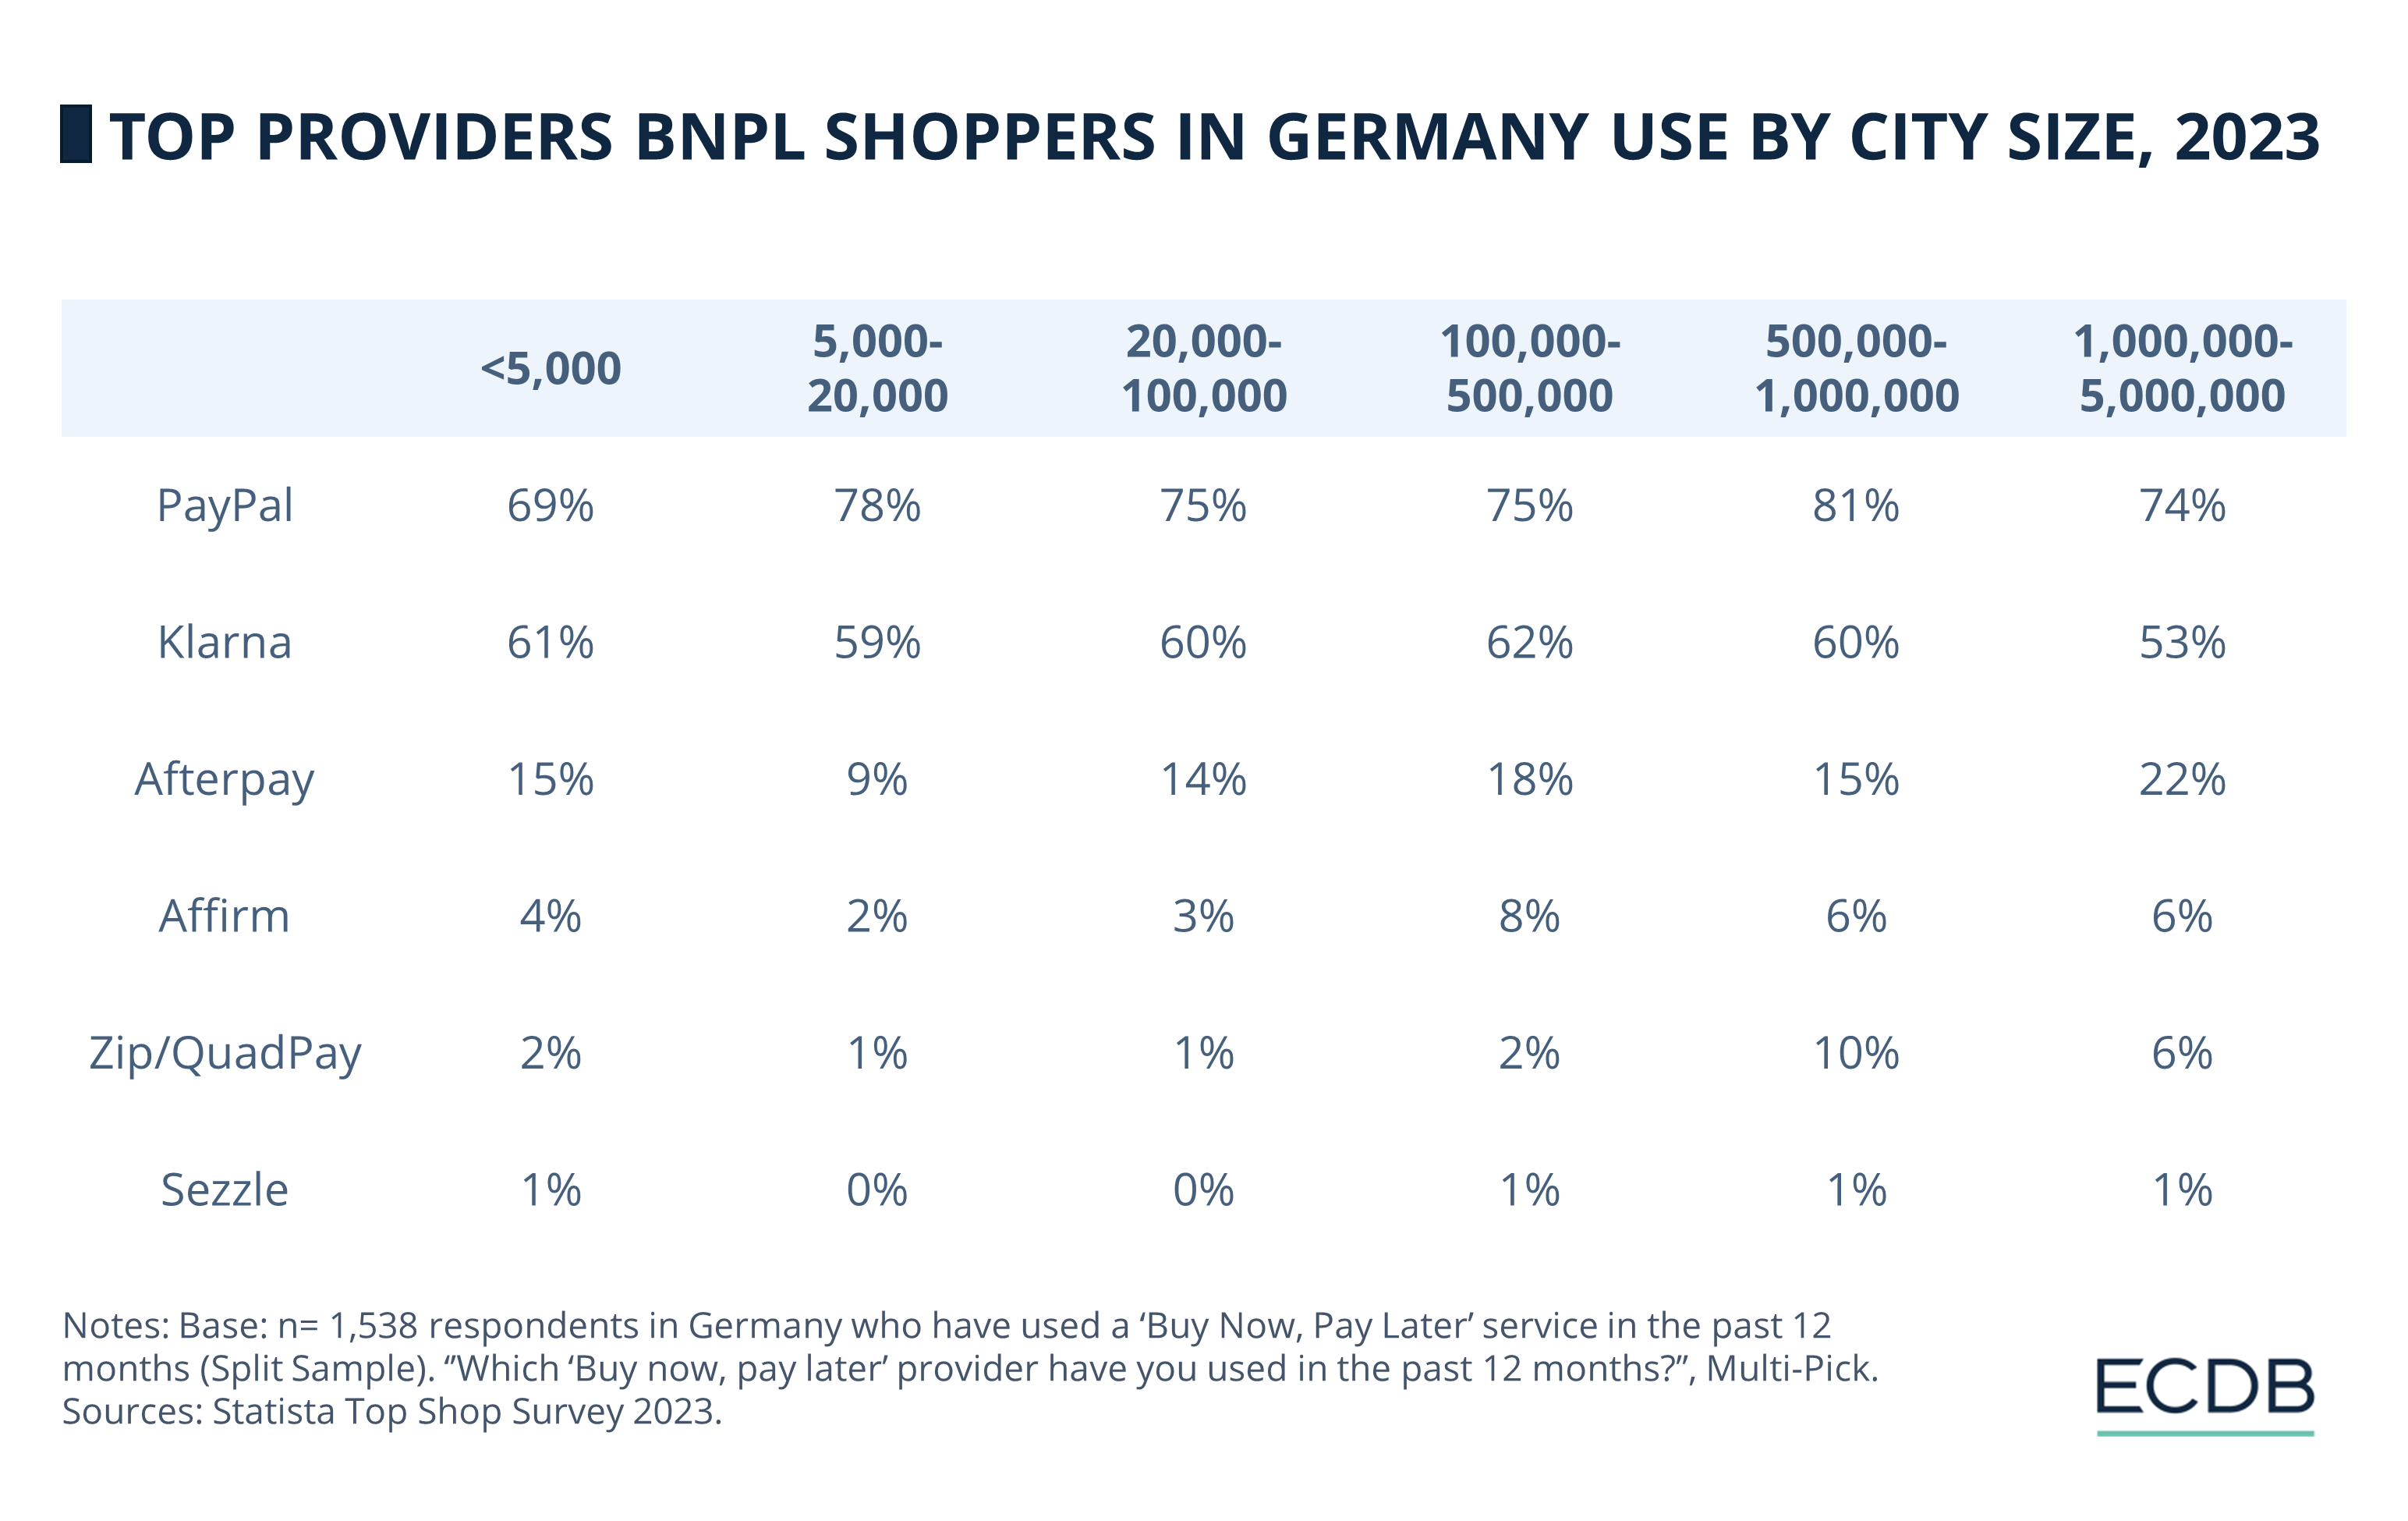 Top Providers BNPL Shoppers in Germany Use by City Size, 2023